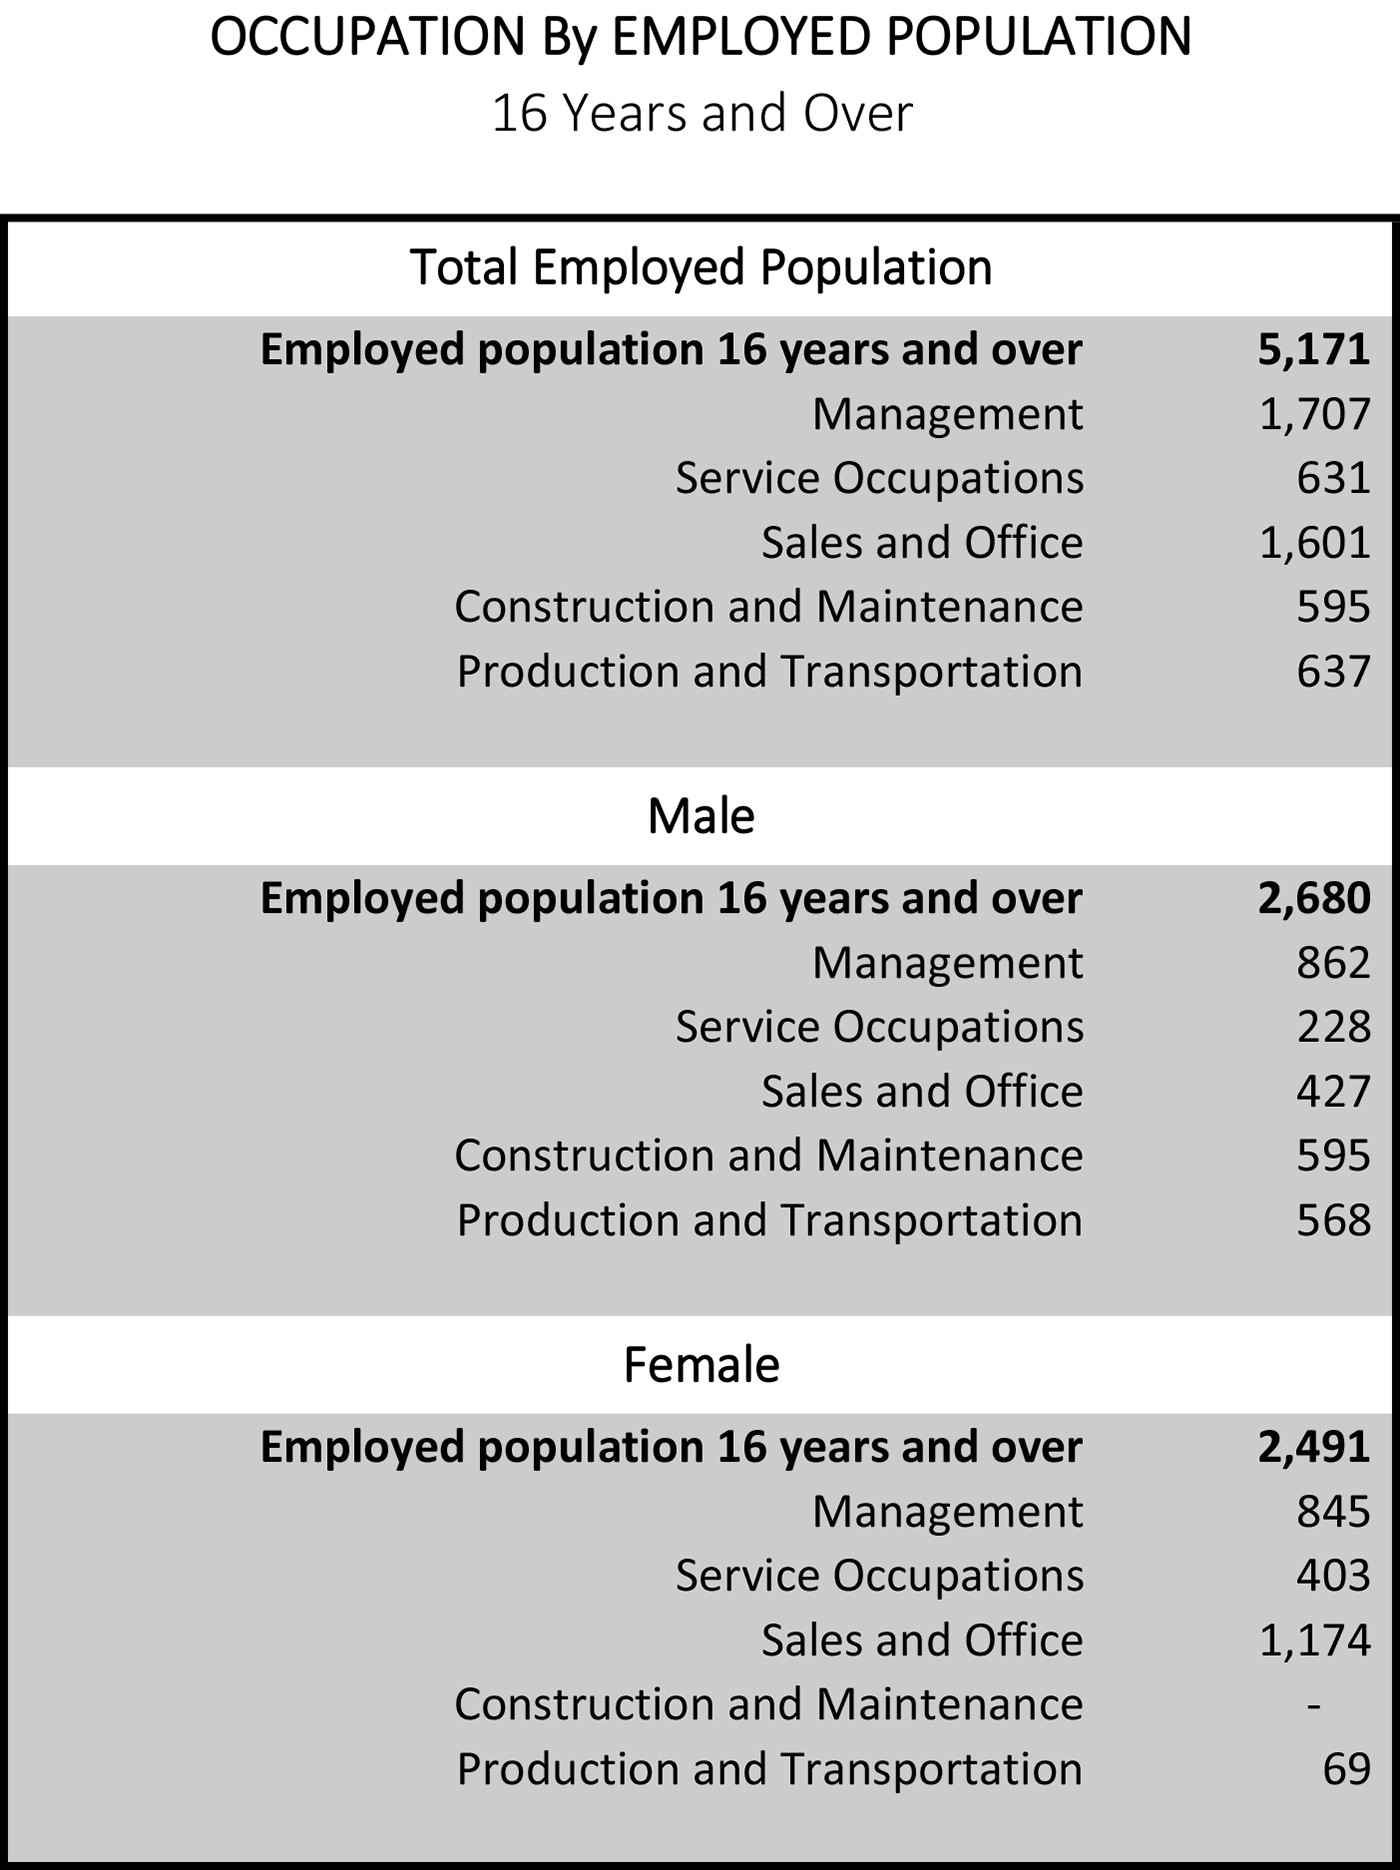 Leeds Alabama Occupation by Employed Population 16 years and over